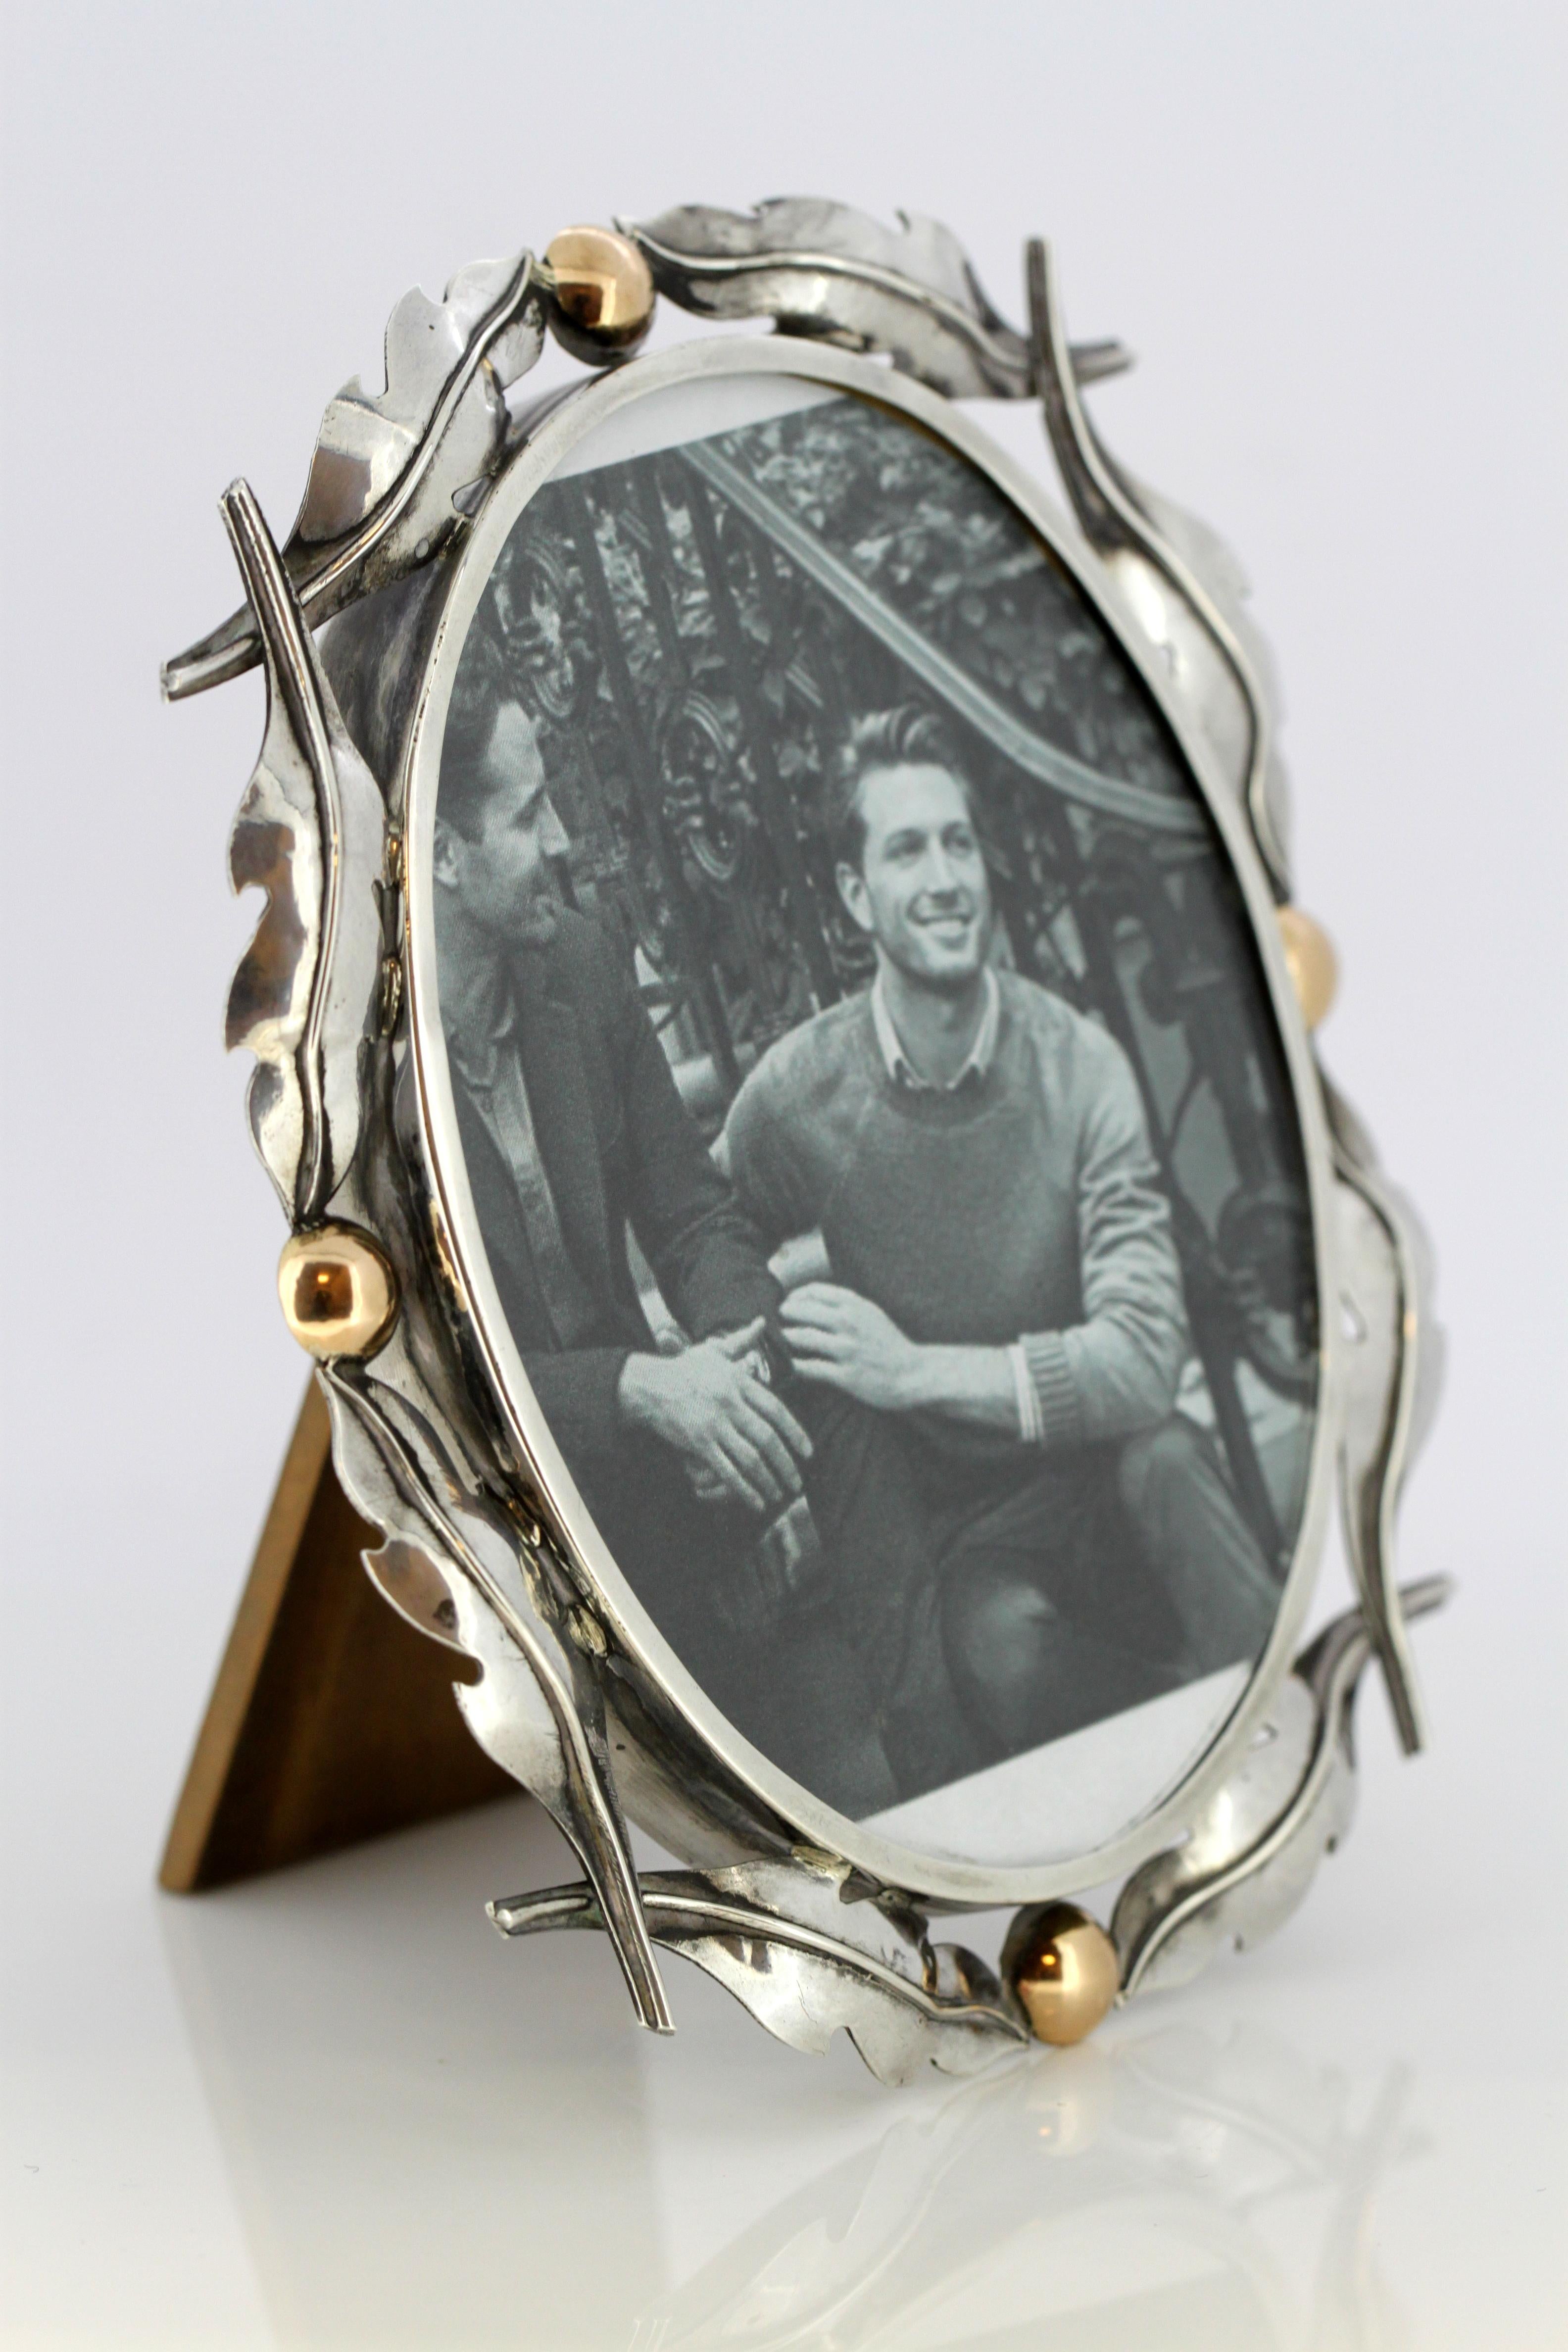 Solid silver and 14-karat gold picture frame
Made in Europe , circa 1920s-1930s
Tested positive for silver and gold.

Size: Height 13.5 cm, width 12 cm, depth 1.5 cm

Weight: silver frame 64 grams, with glass: 165 grams
Condition: General